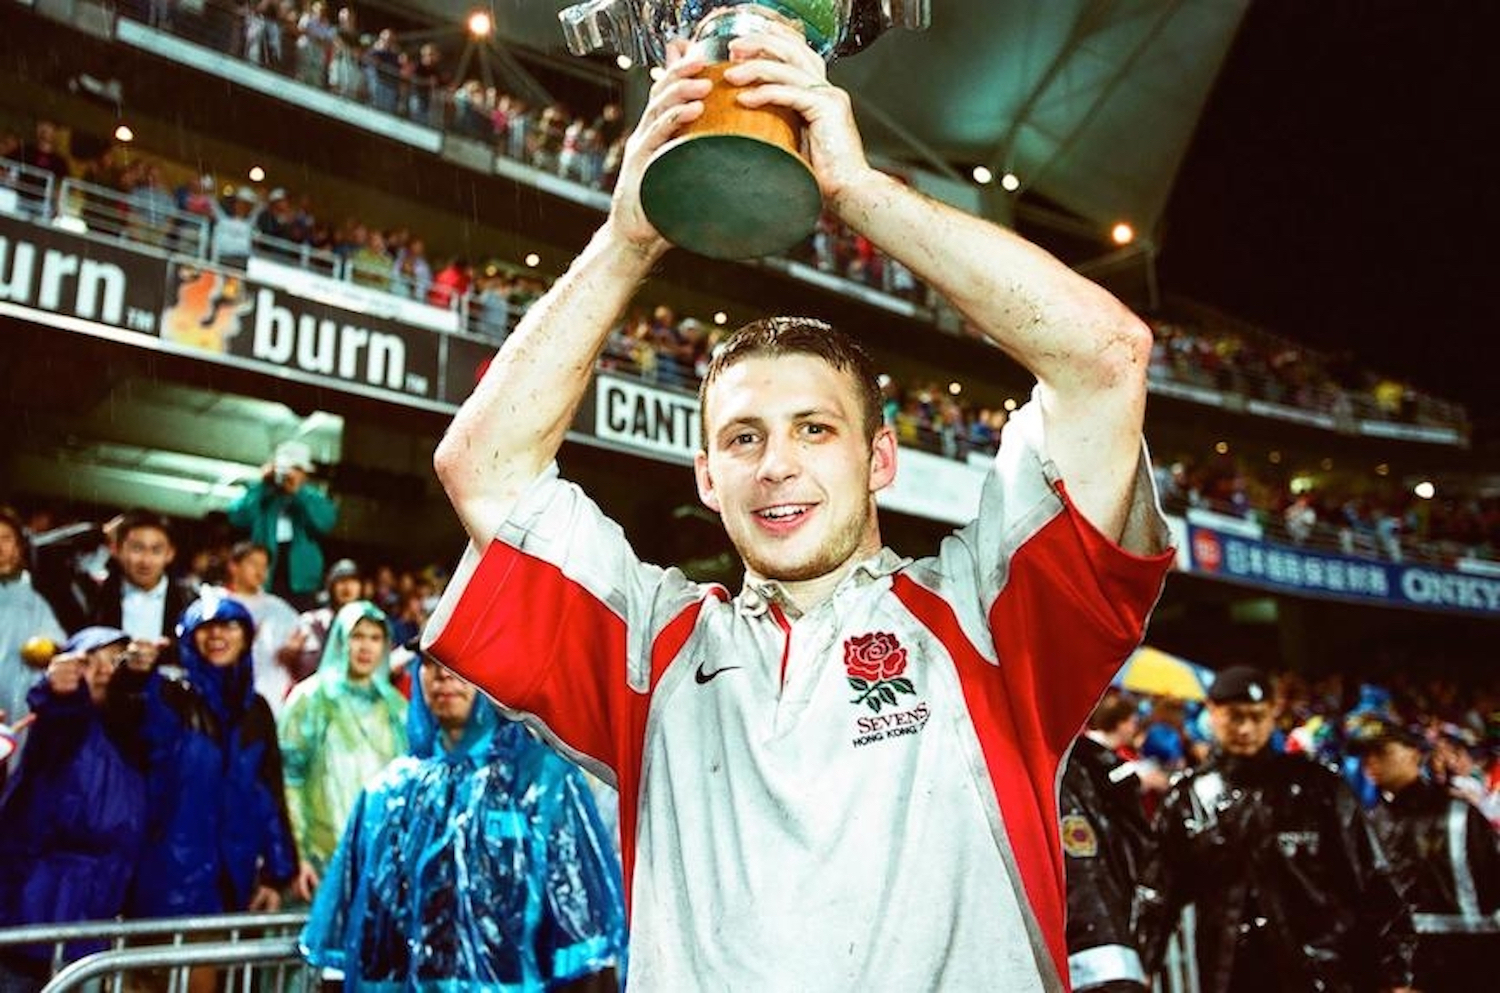 Simon Amor, the new interim Hong Kong coach, lifts cup for England at HK7s 2002. England beat Fiji 33-20 in the final on 24 March. Click to enlarge.